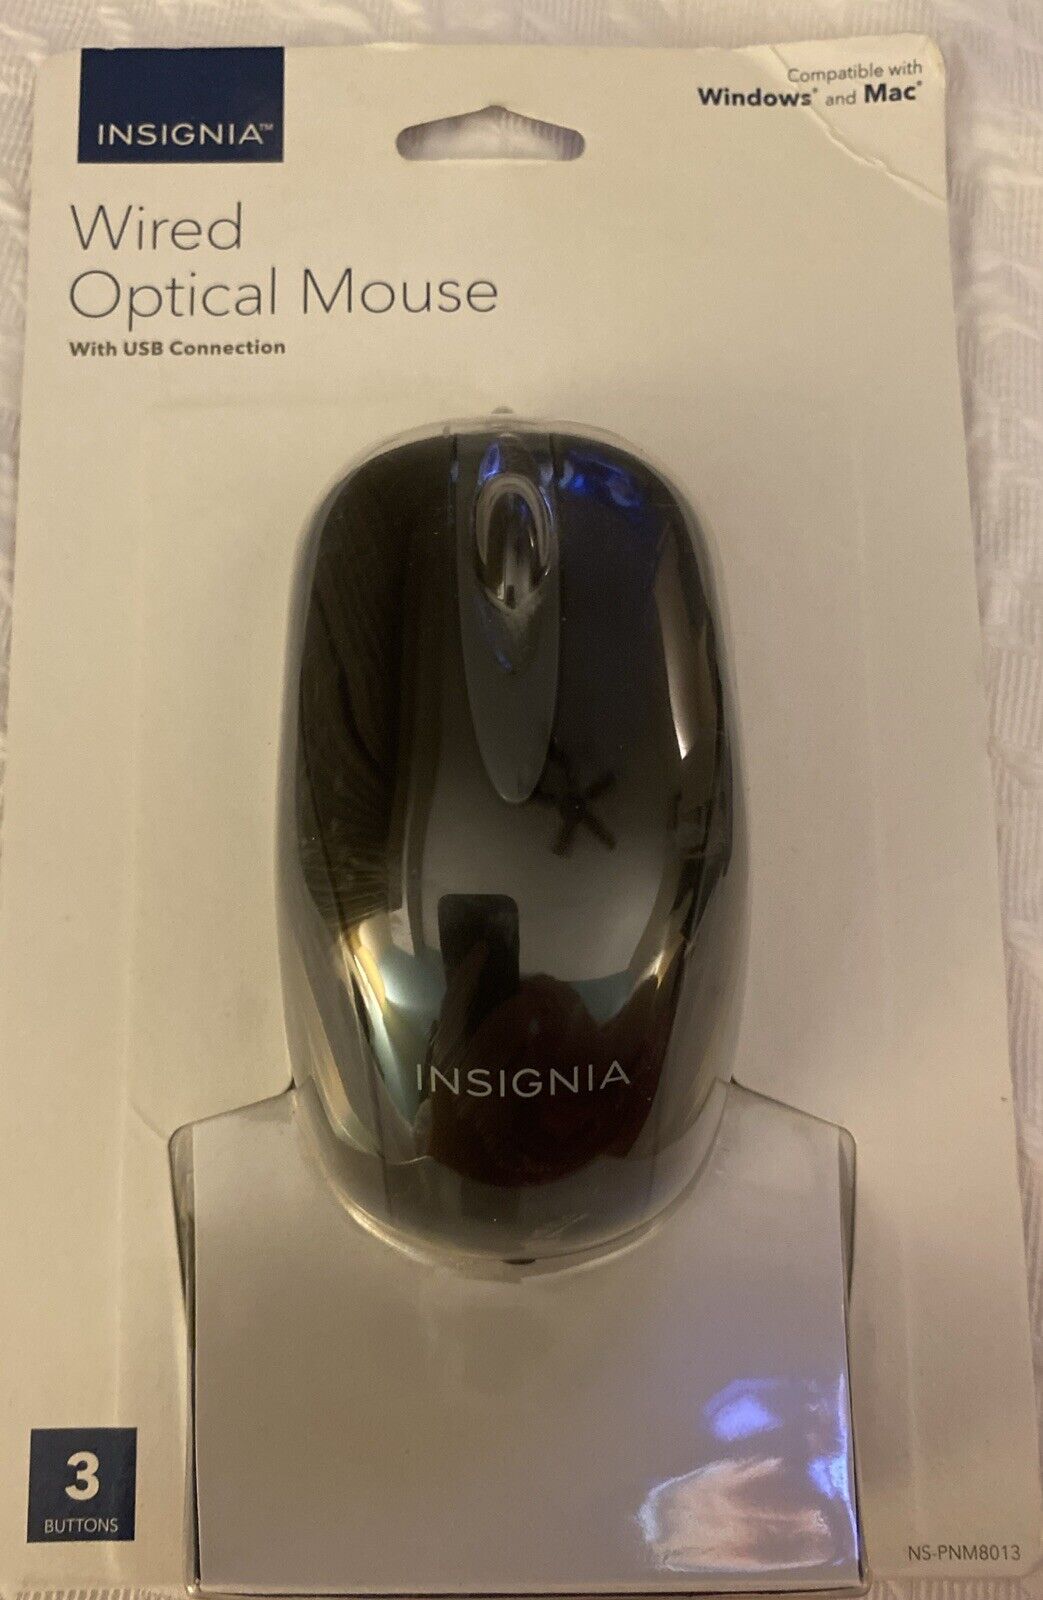 INSIGNIA Wired Optical Mouse Black USB 3 Button Windows and Mac NS-PNM8013